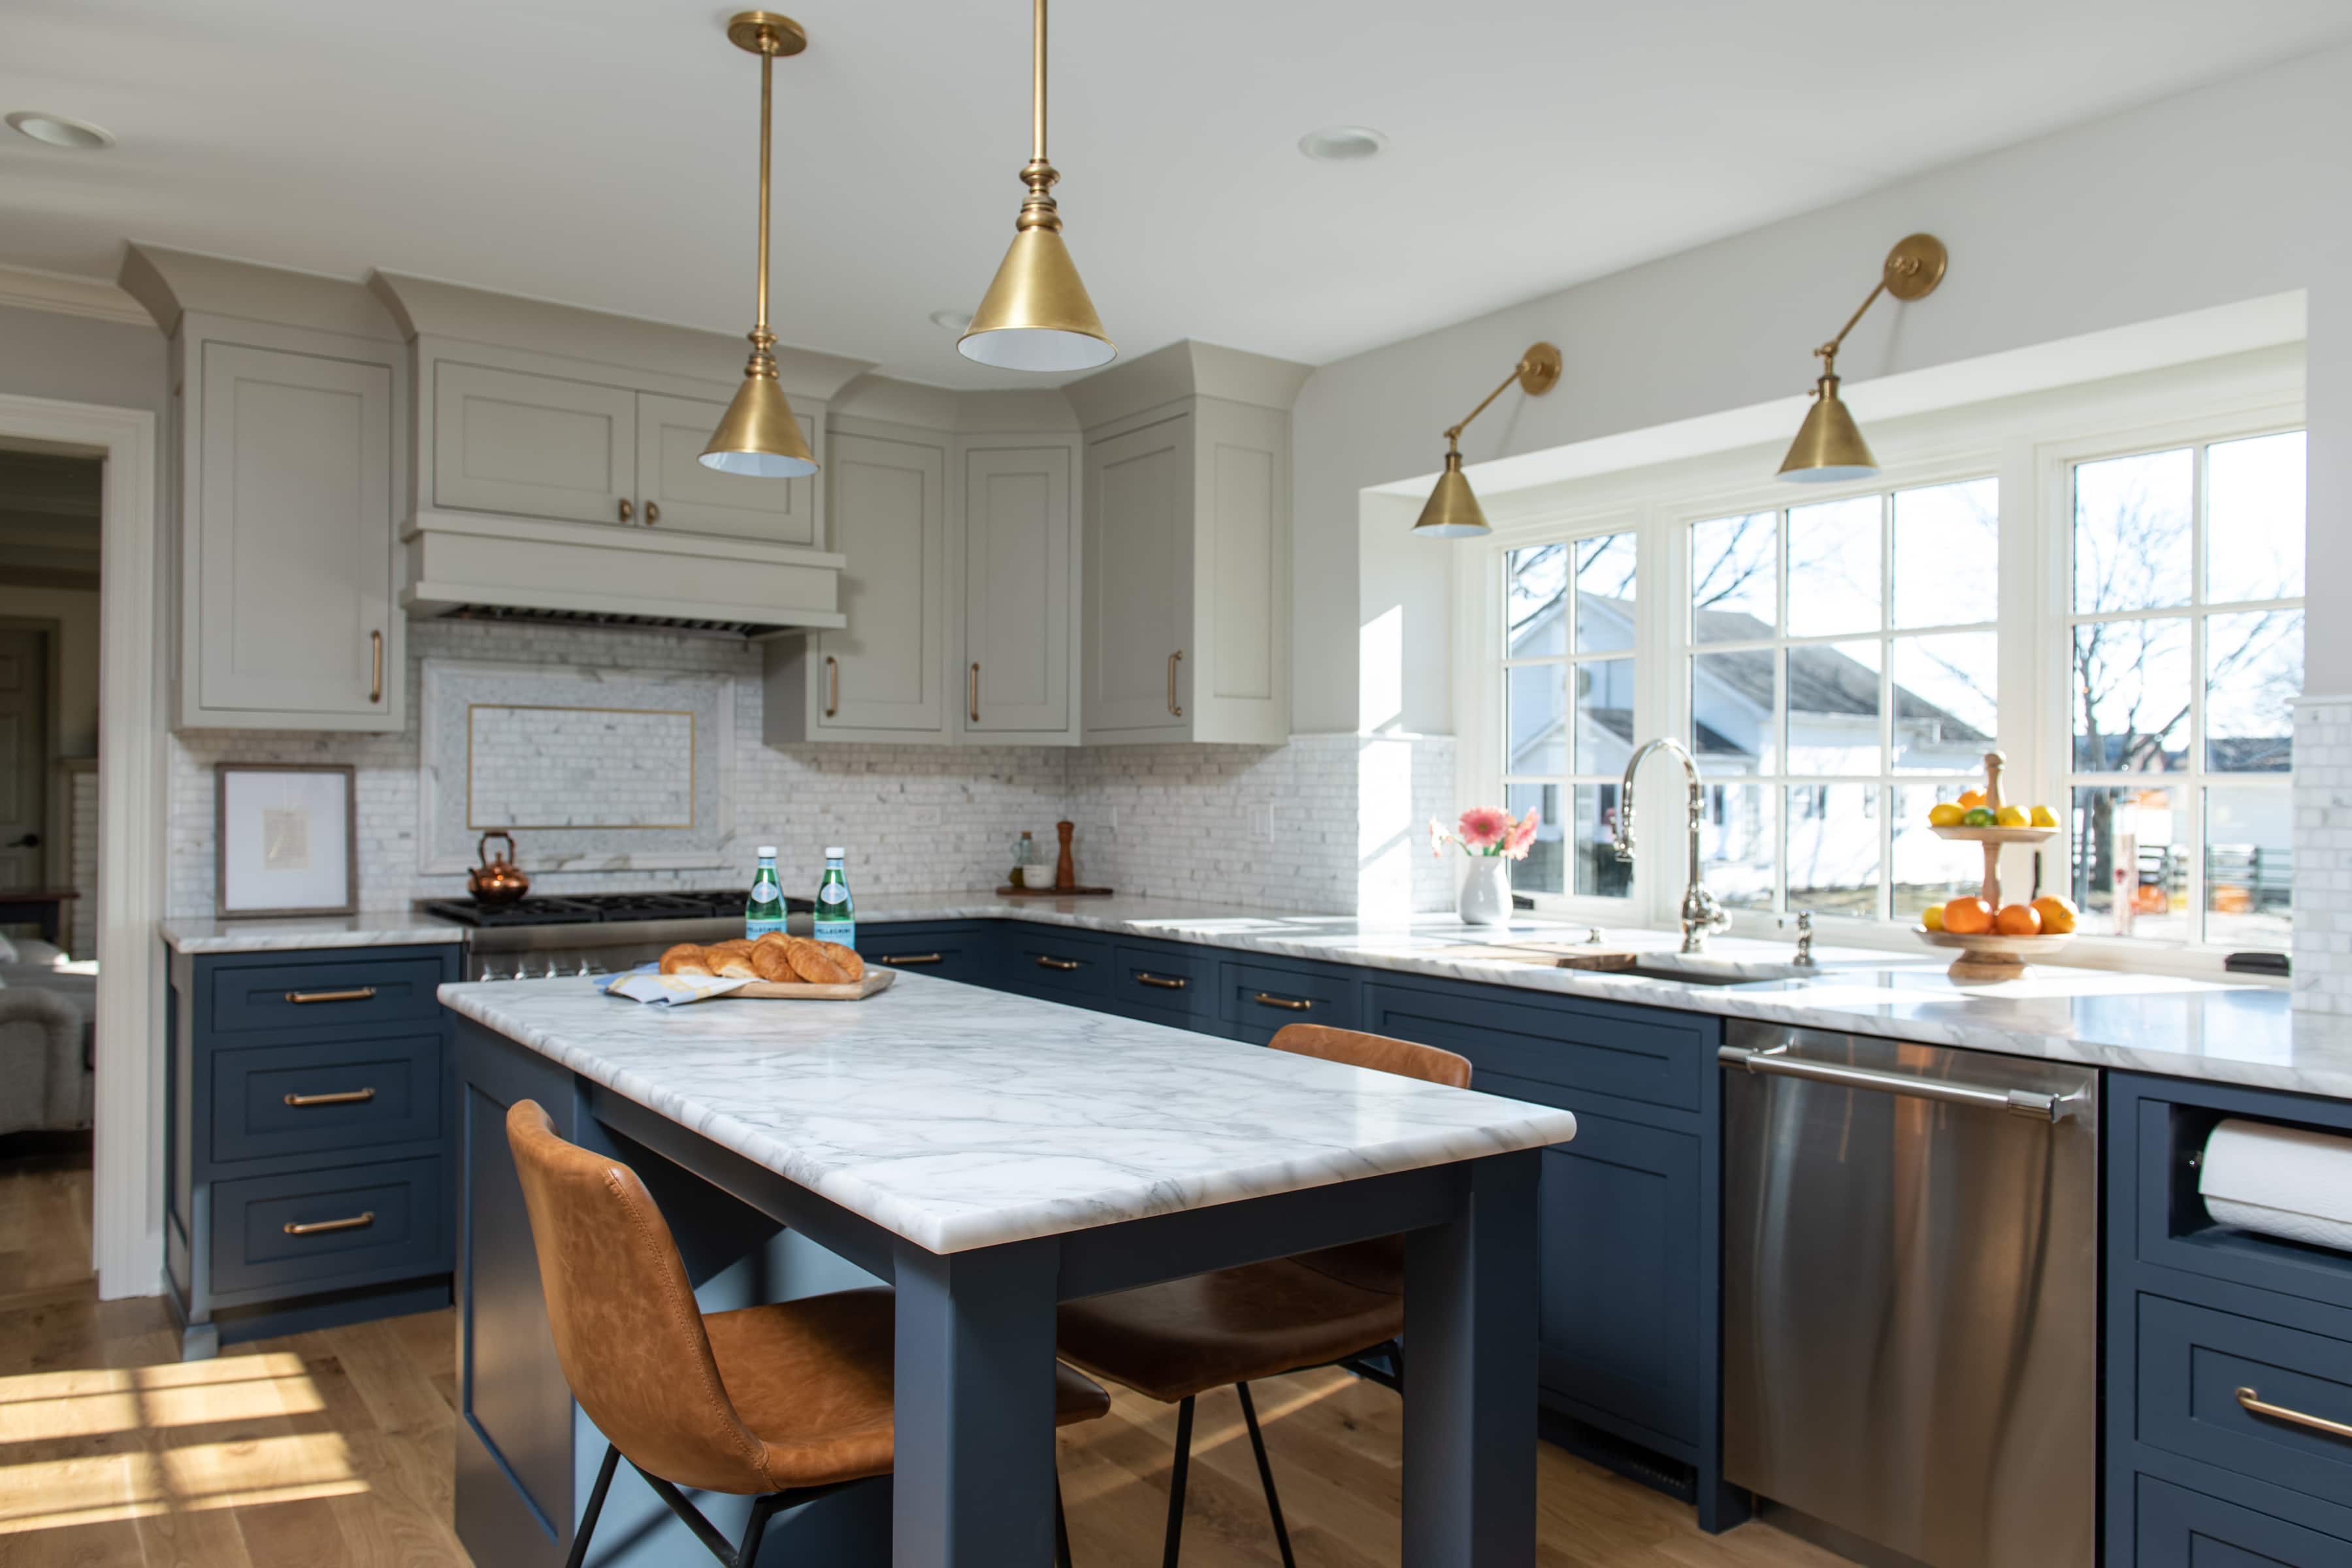 kitchen remodel with two best colors for kitchen cabinets - hale navy and Revere Pewter